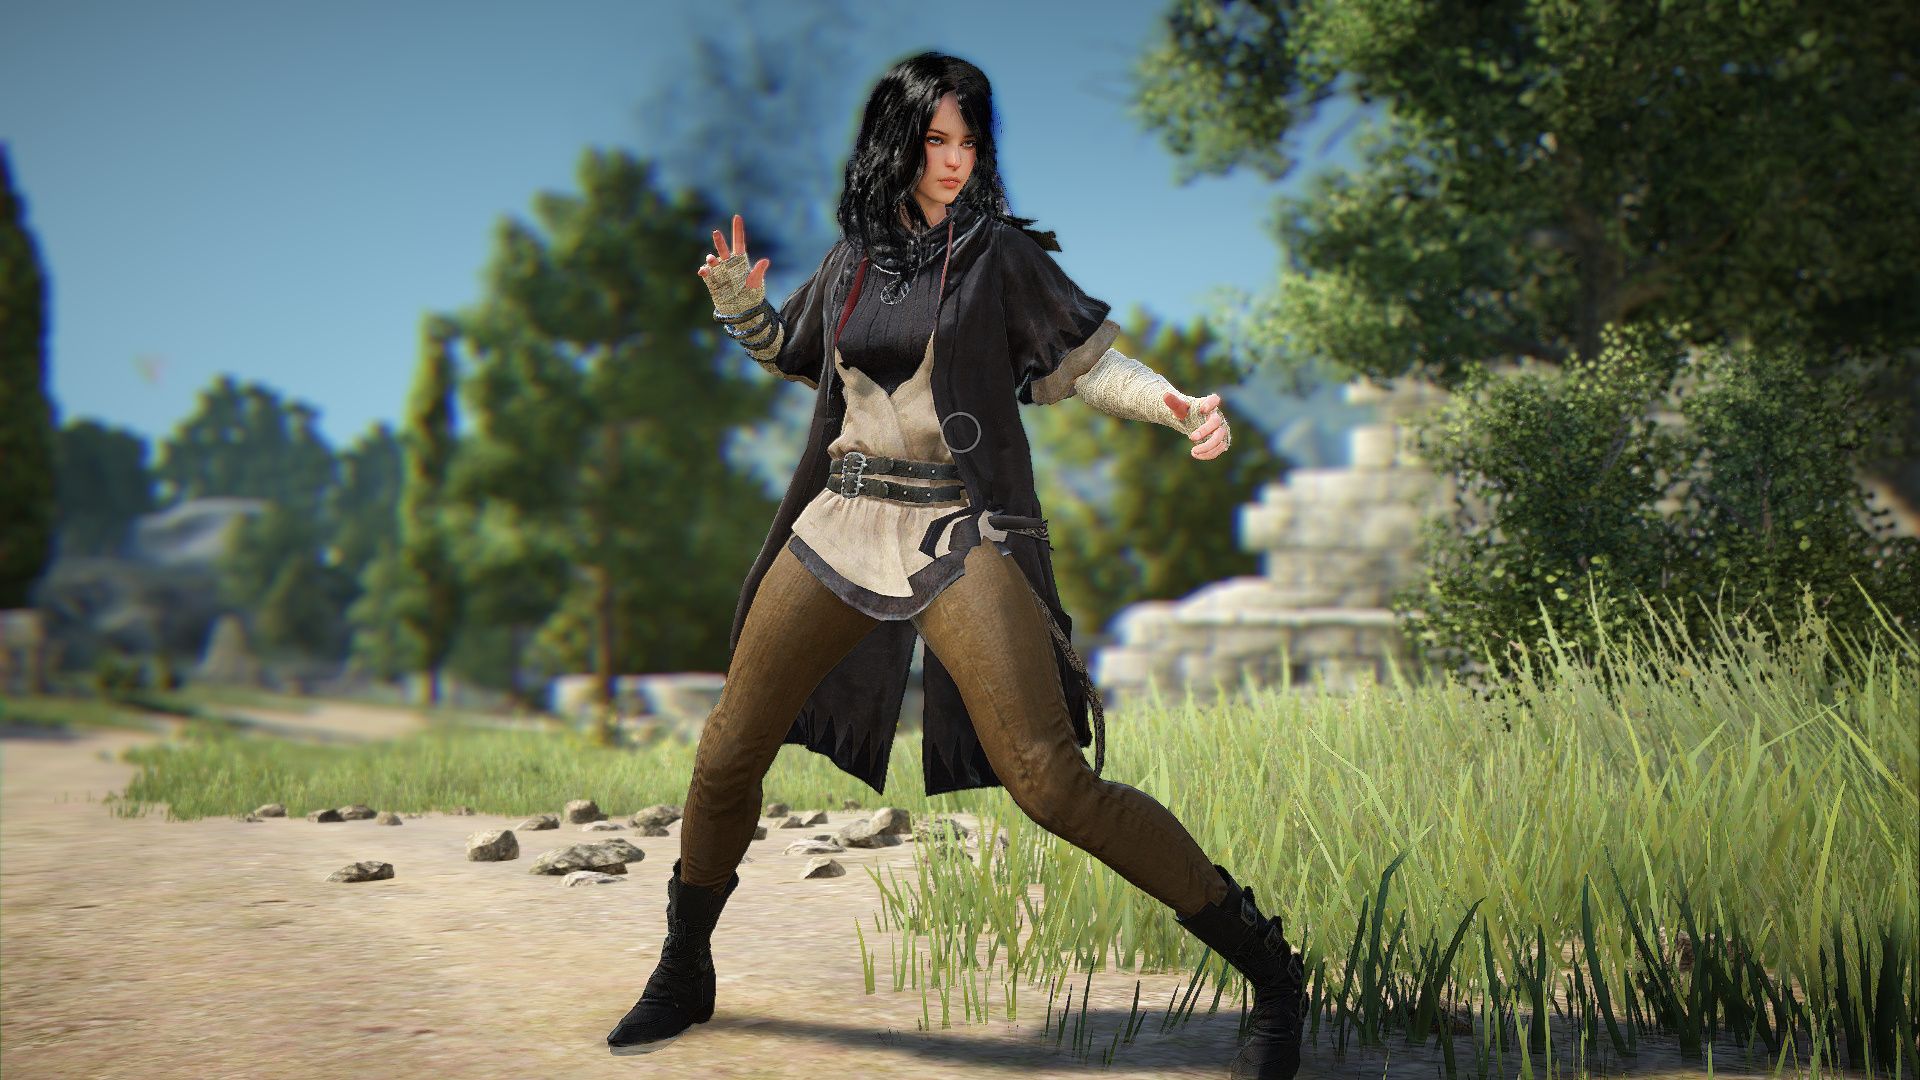 Black Desert Online - live streams and actual gameplays